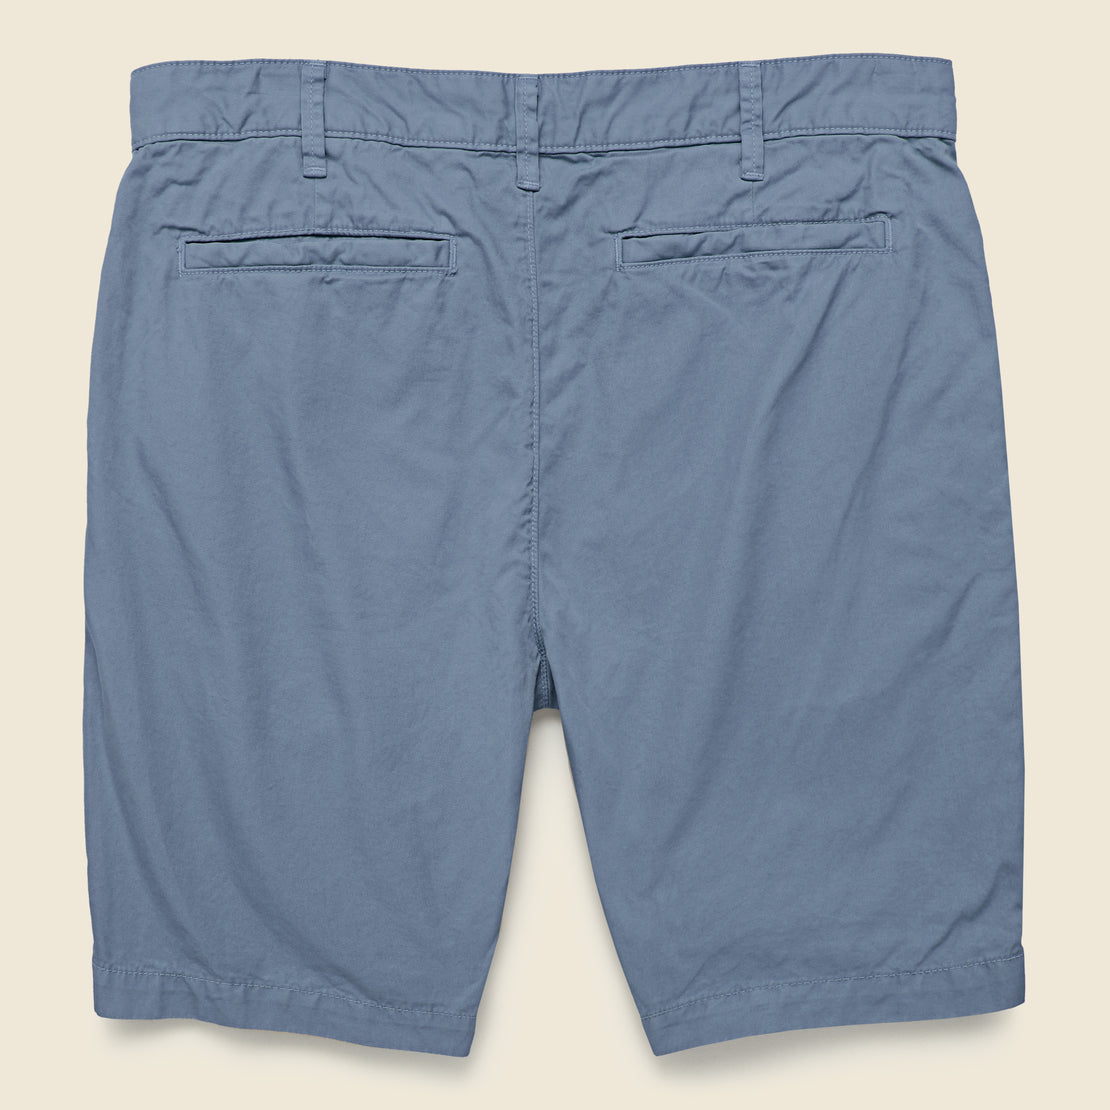 8-inch Twill Bermuda Short - Wave - Save Khaki - STAG Provisions - Shorts - Solid